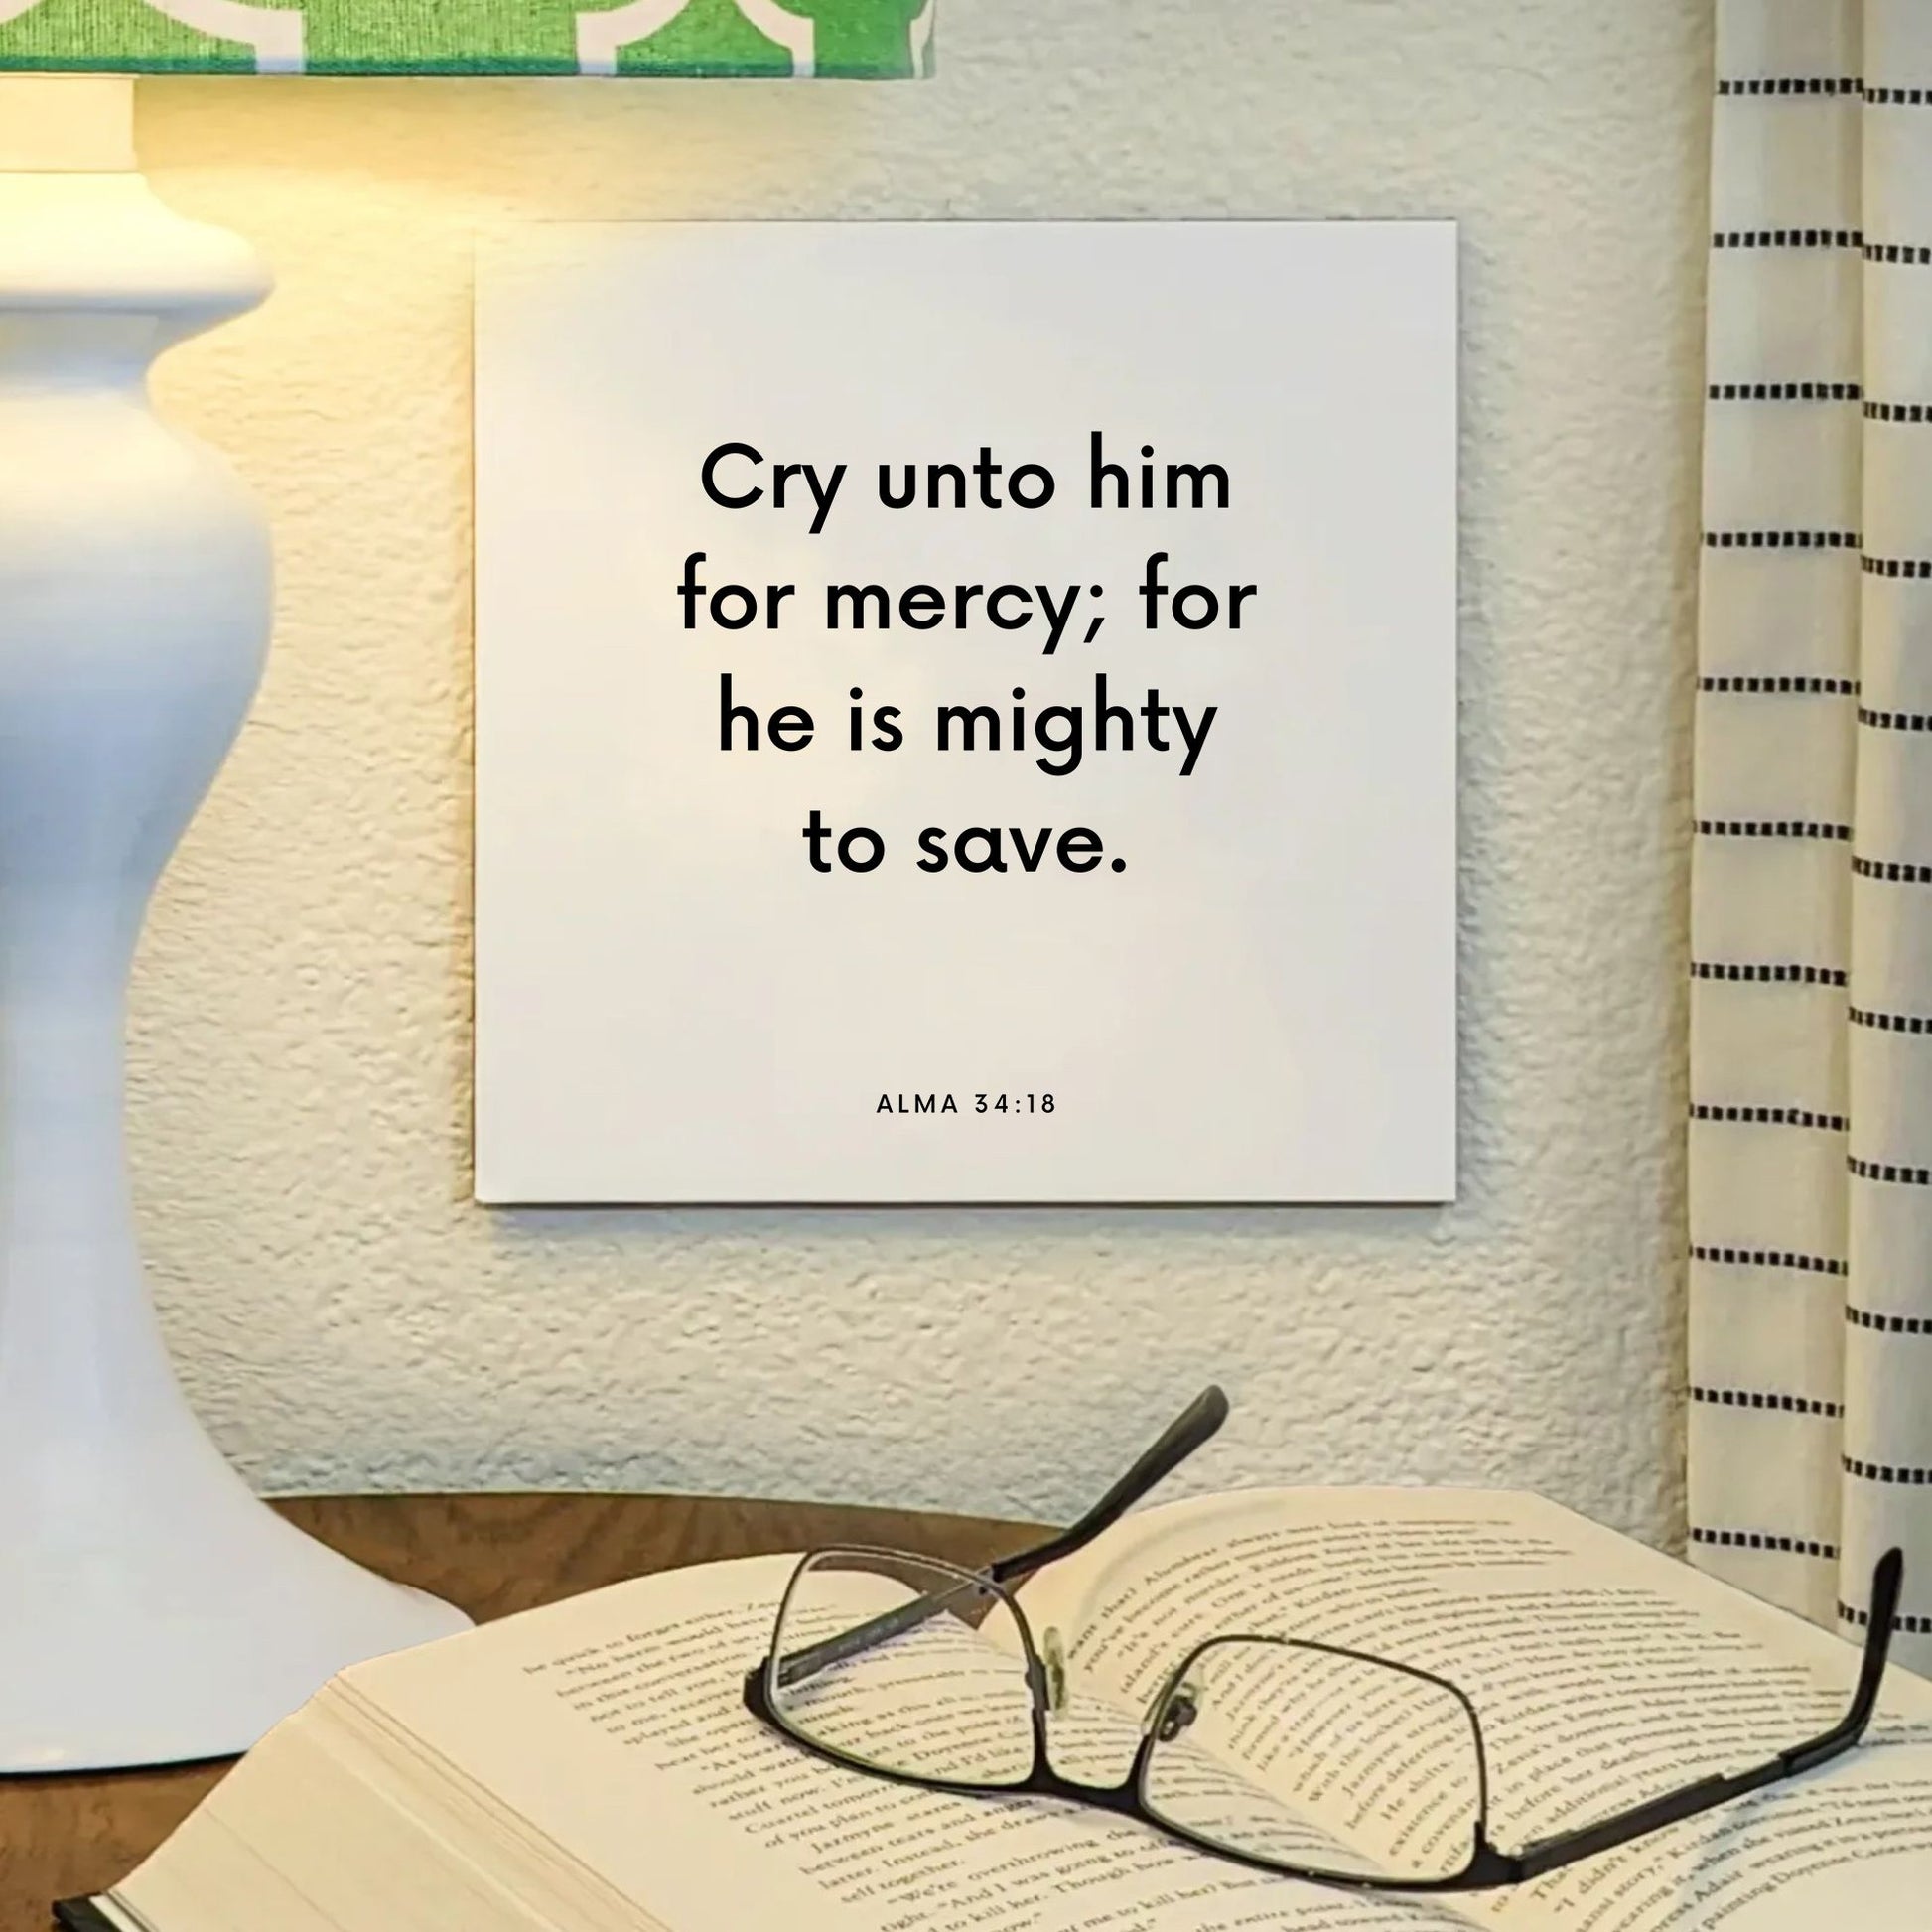 Lamp mouting of the scripture tile for Alma 34:18 - "Cry unto him for mercy; for he is mighty to save."